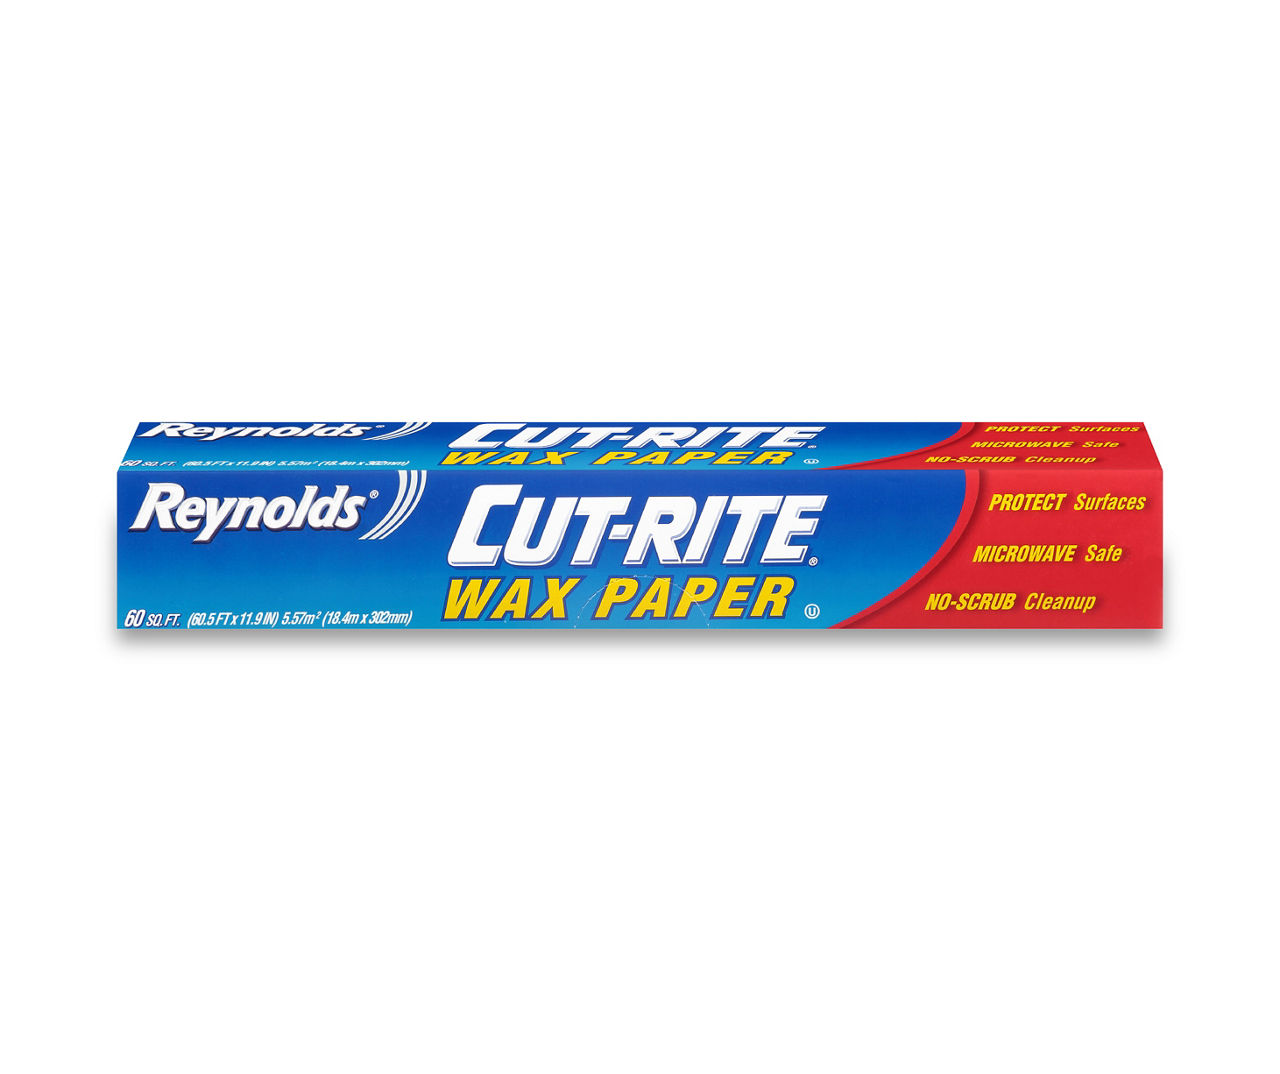 Reynolds: 75' Cut-Rite Wax Paper :: Fennell & Gage Home Hardware